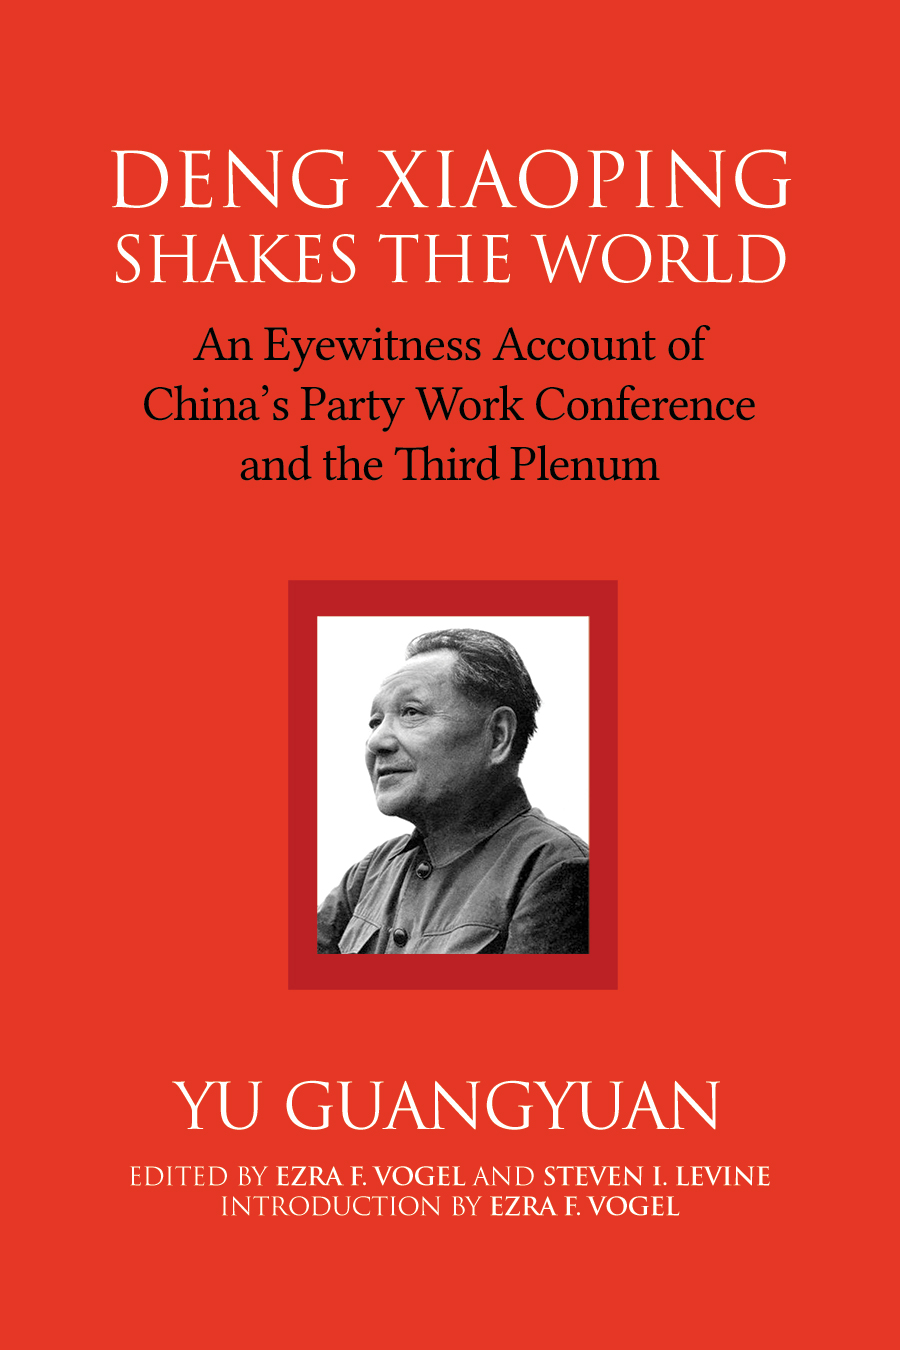 The cover of Deng Xiaoping Shakes The World